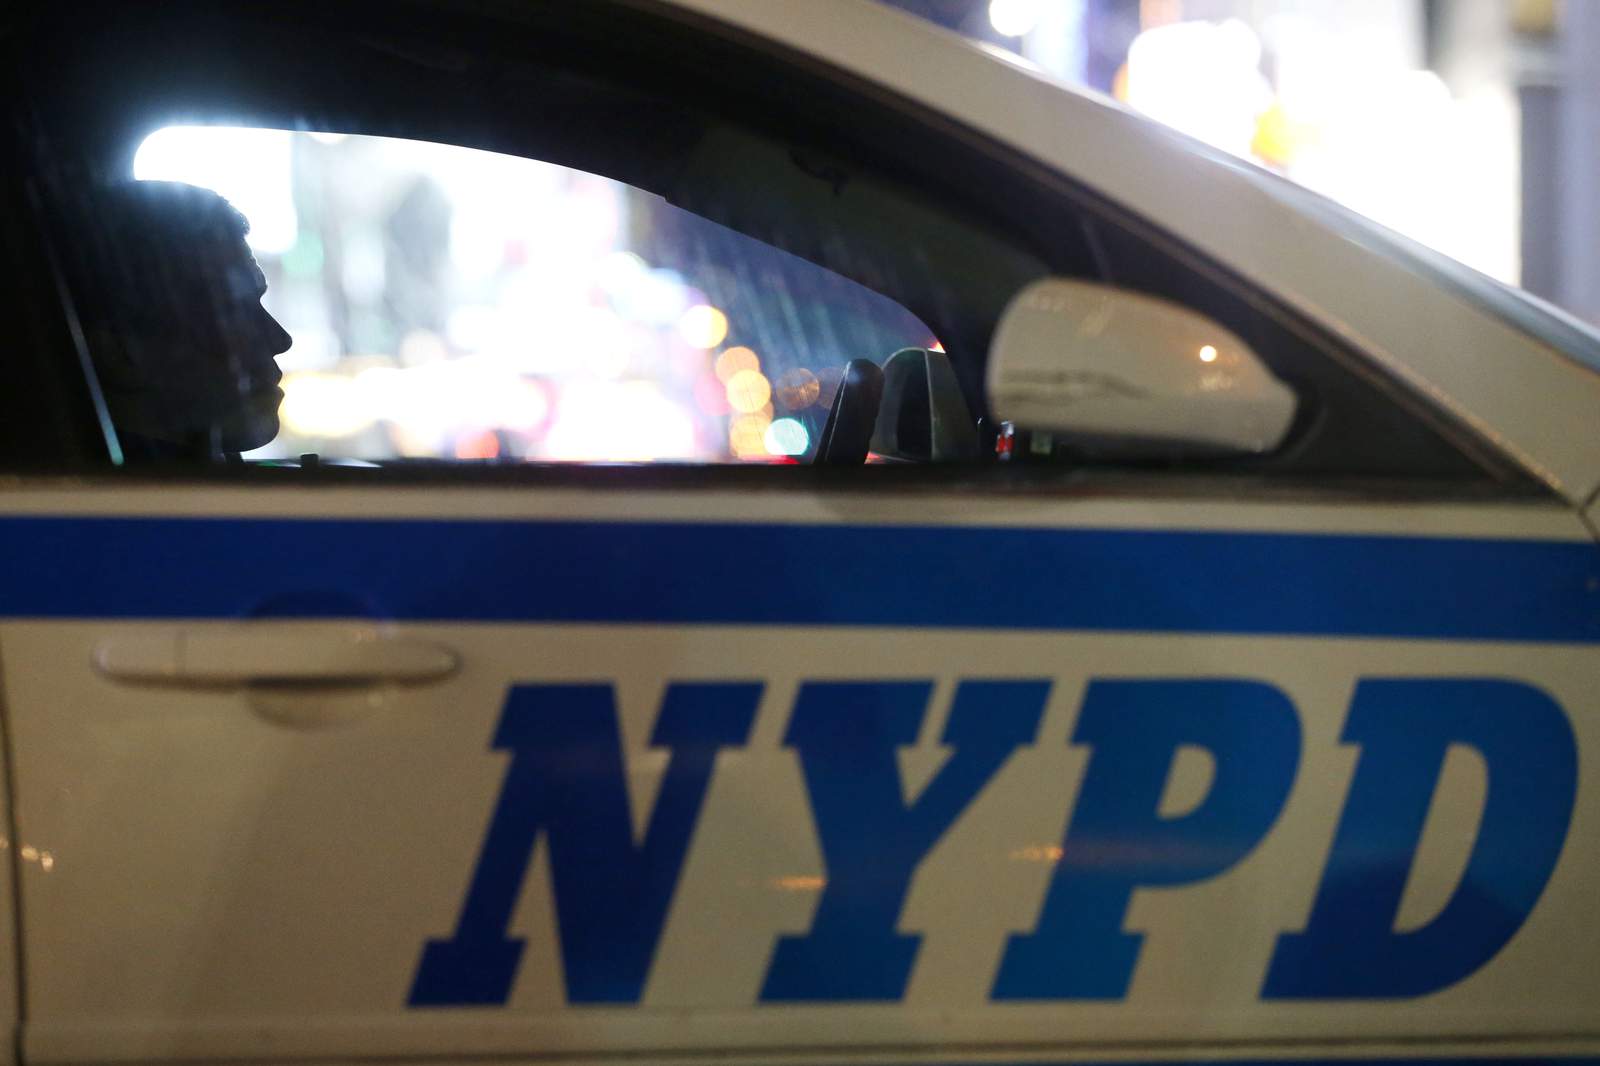 NYPD officer suspended without pay following disturbing apparent chokehold incident